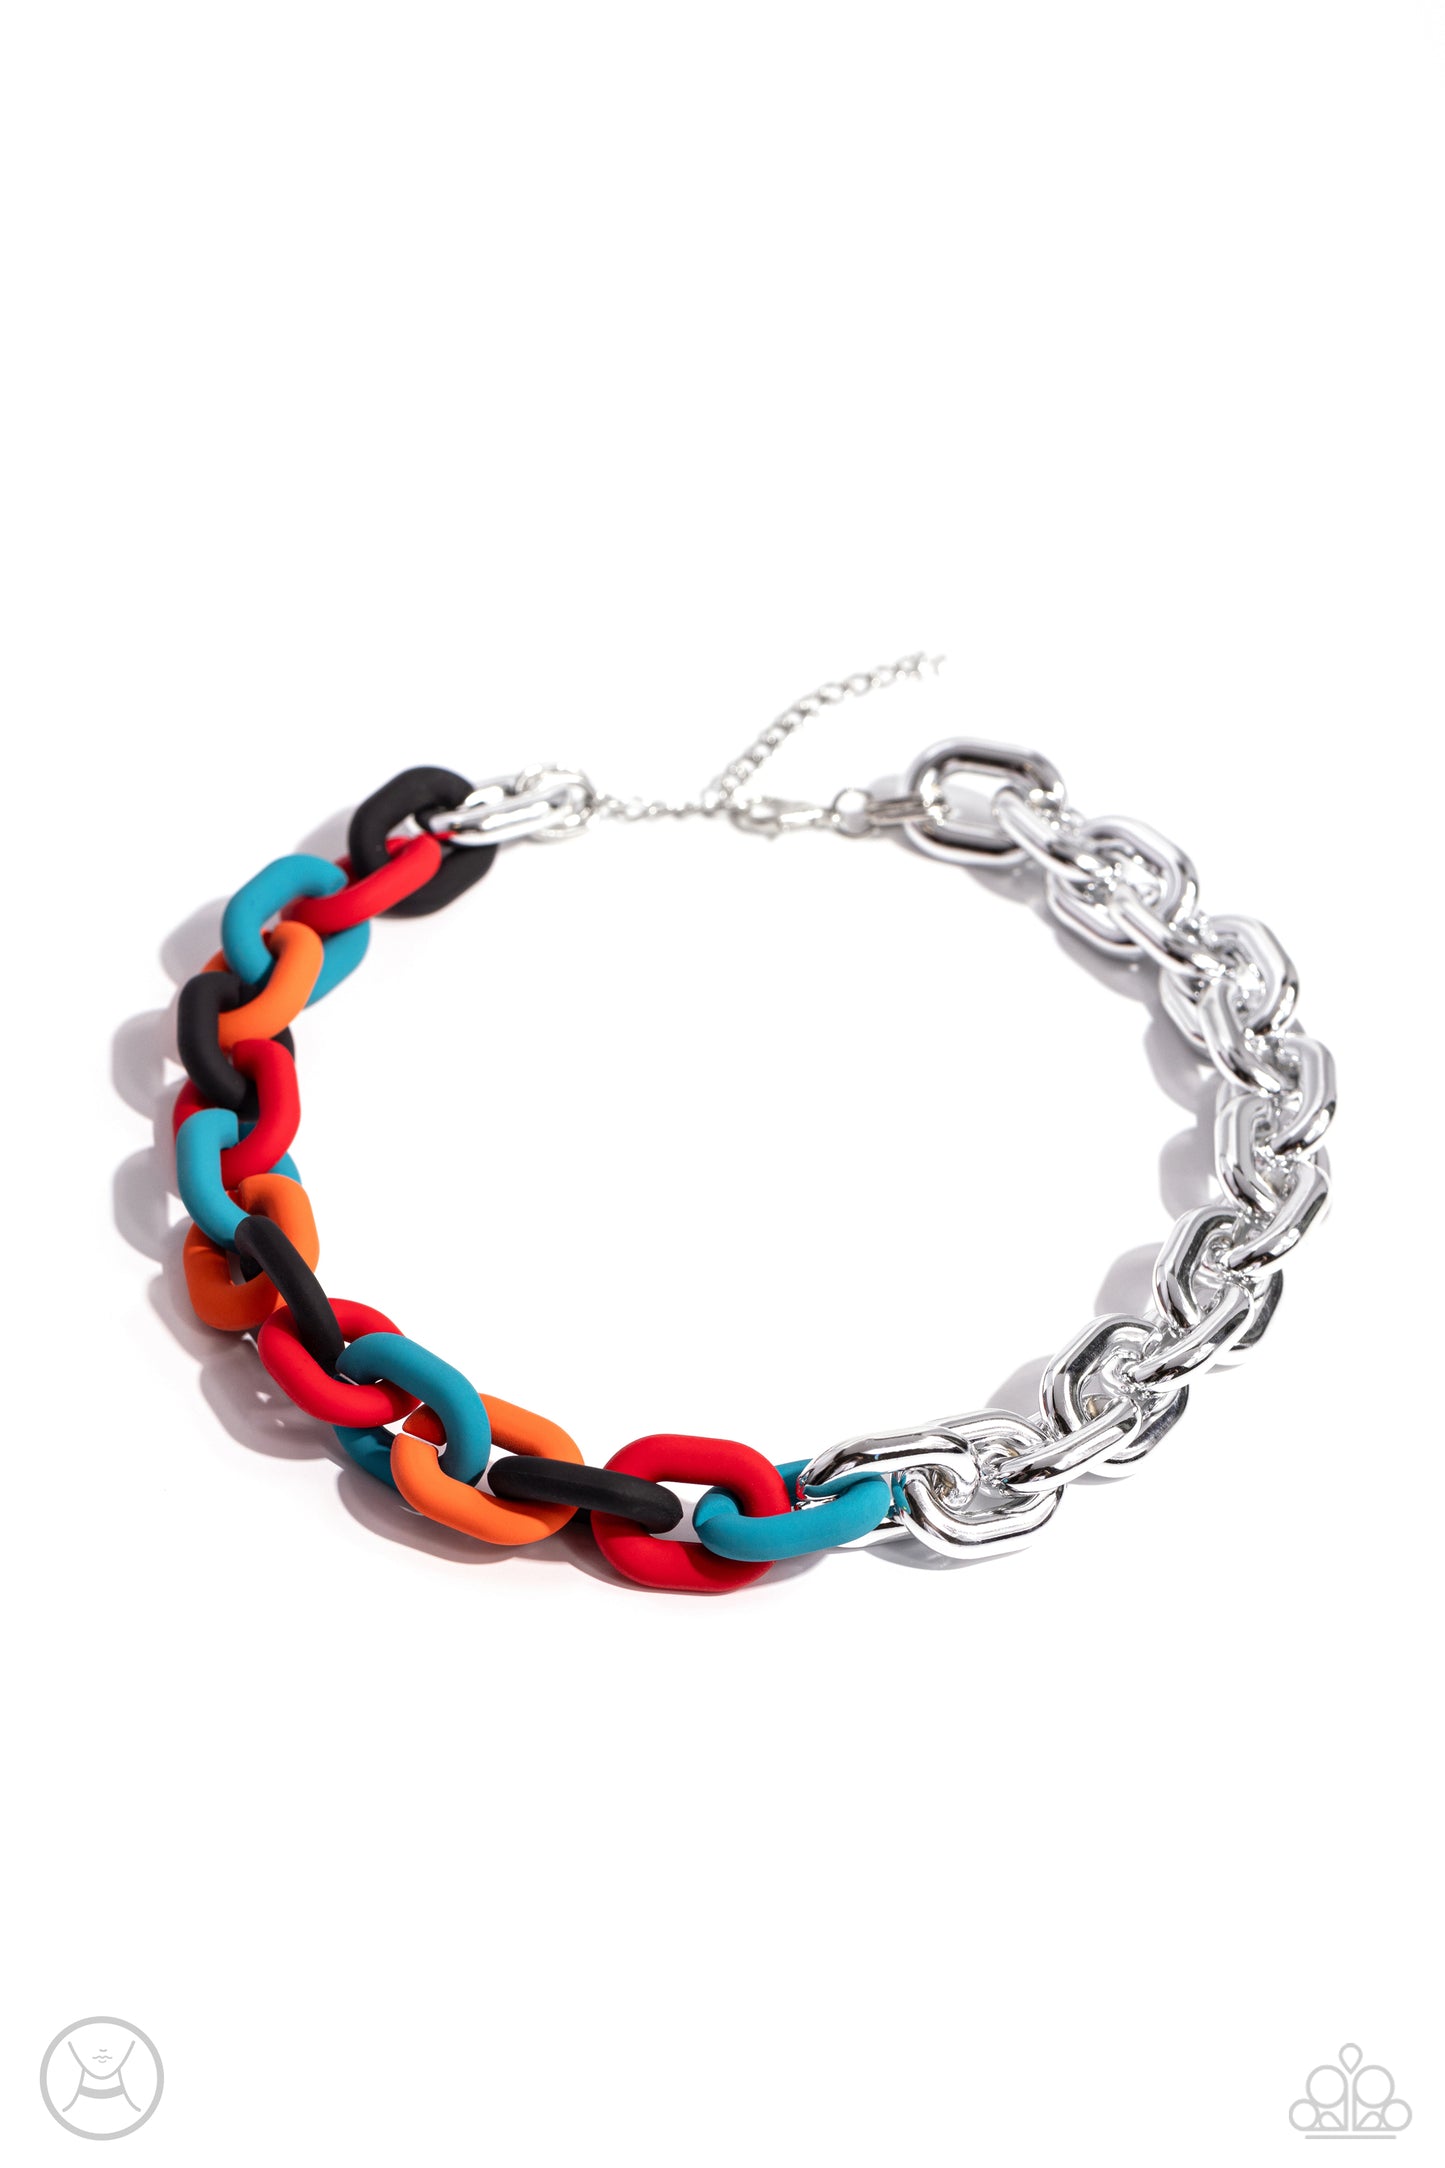 Paparazzi Accessories - Contrasting Couture & Candid Contrast - Black Jewelry Set strand of oversized silver curb chain collides with black, red, turquoise, and orange acrylic curb links to create an abstract blend of grit and color. The oversized links of the colored curb chain offset the high sheen of the silver that lays on the opposite side, perfectly balancing the contrasting design. Features an adjustable clasp closure.  Sold as one individual choker necklace. Includes one pair of matching earrings.